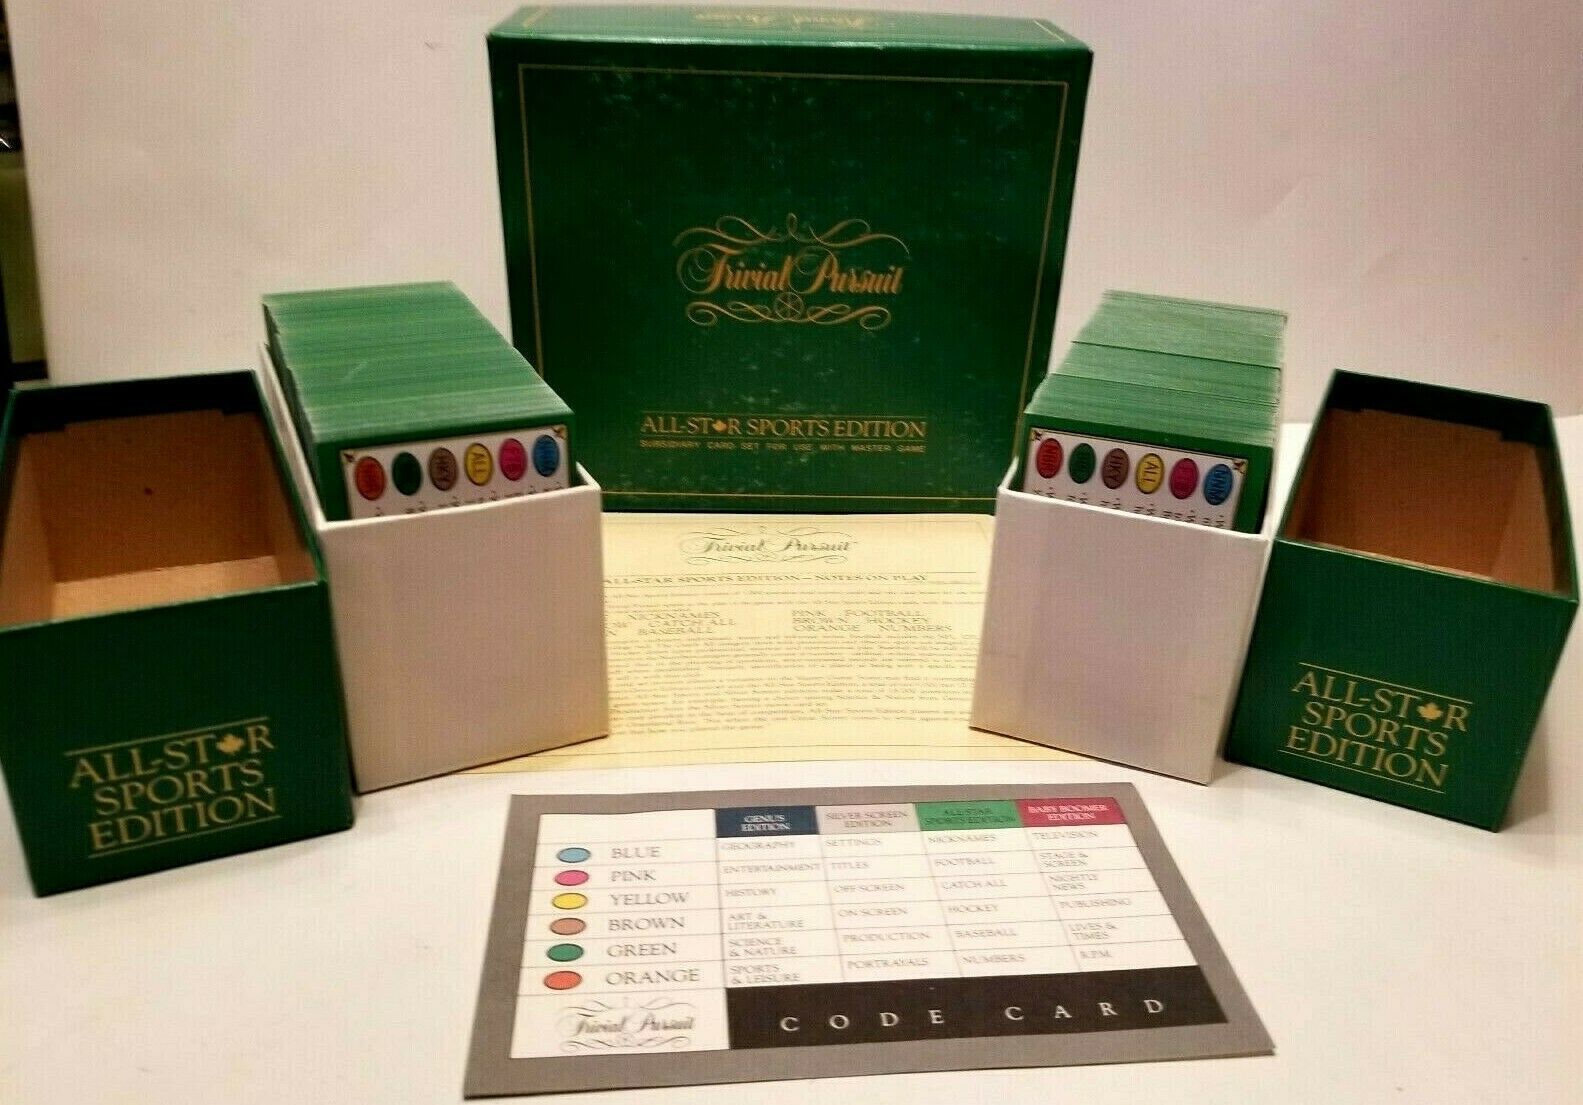 TRIVIAL PURSUIT ALL-STAR SPORTS EDITION Subsidiary card set Nice! - $5.93